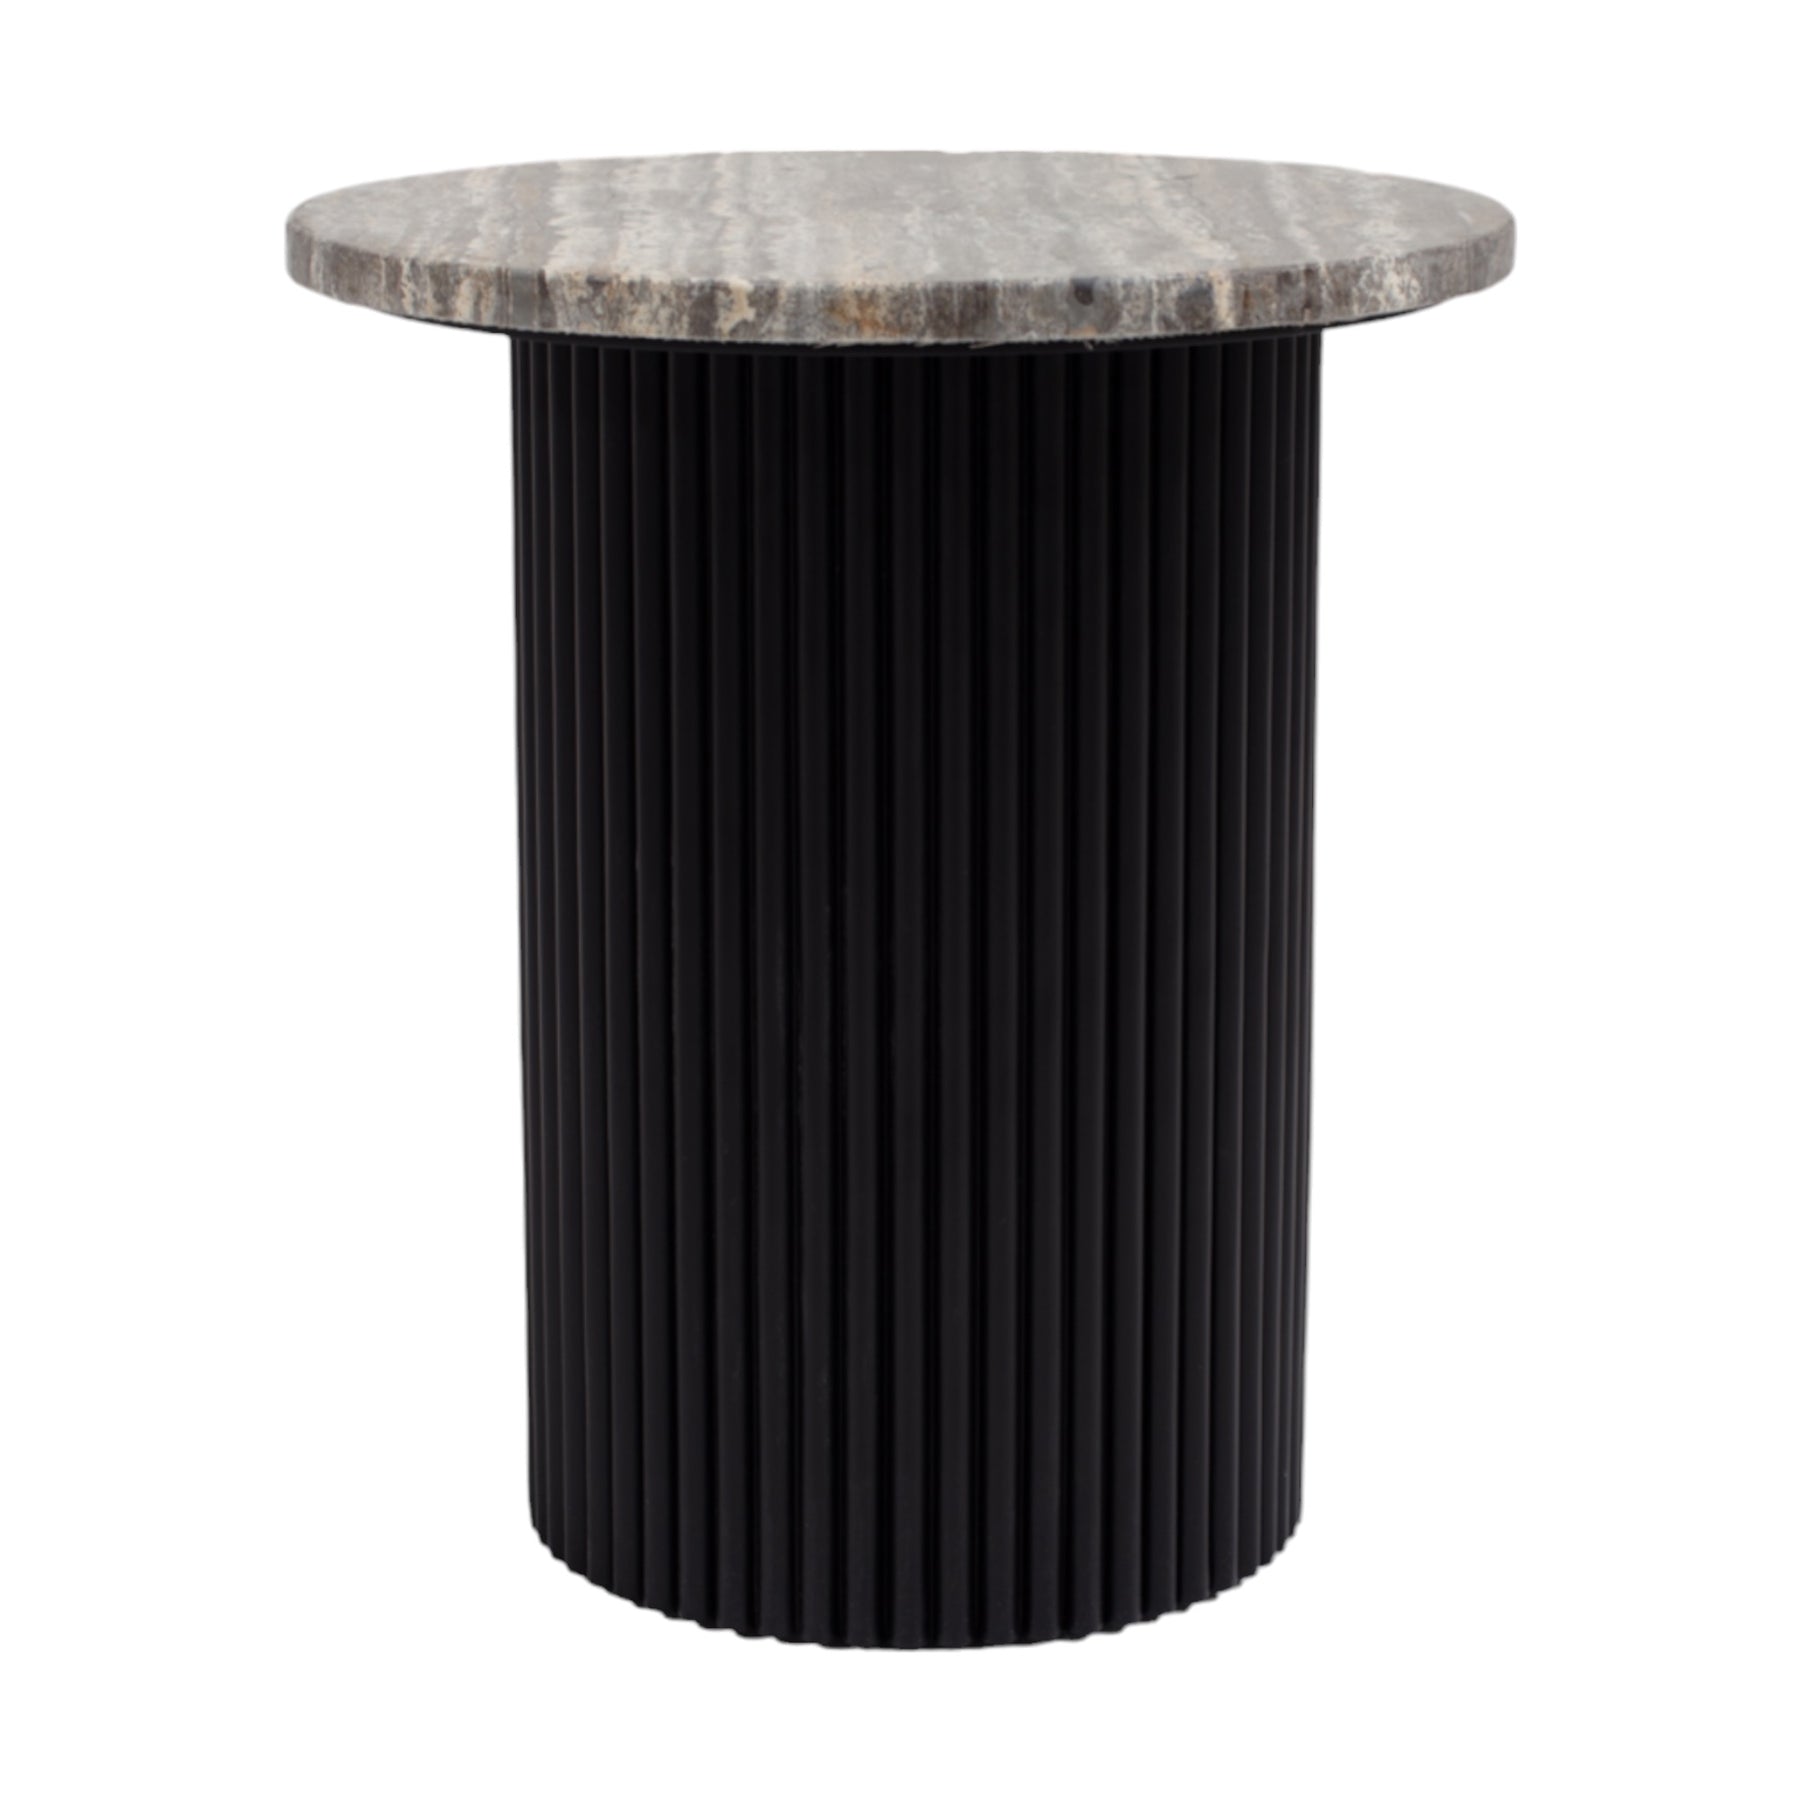 HAND MADE NORDIC BLACK FLUTED GREY TRAVERINE SIDE TABLE